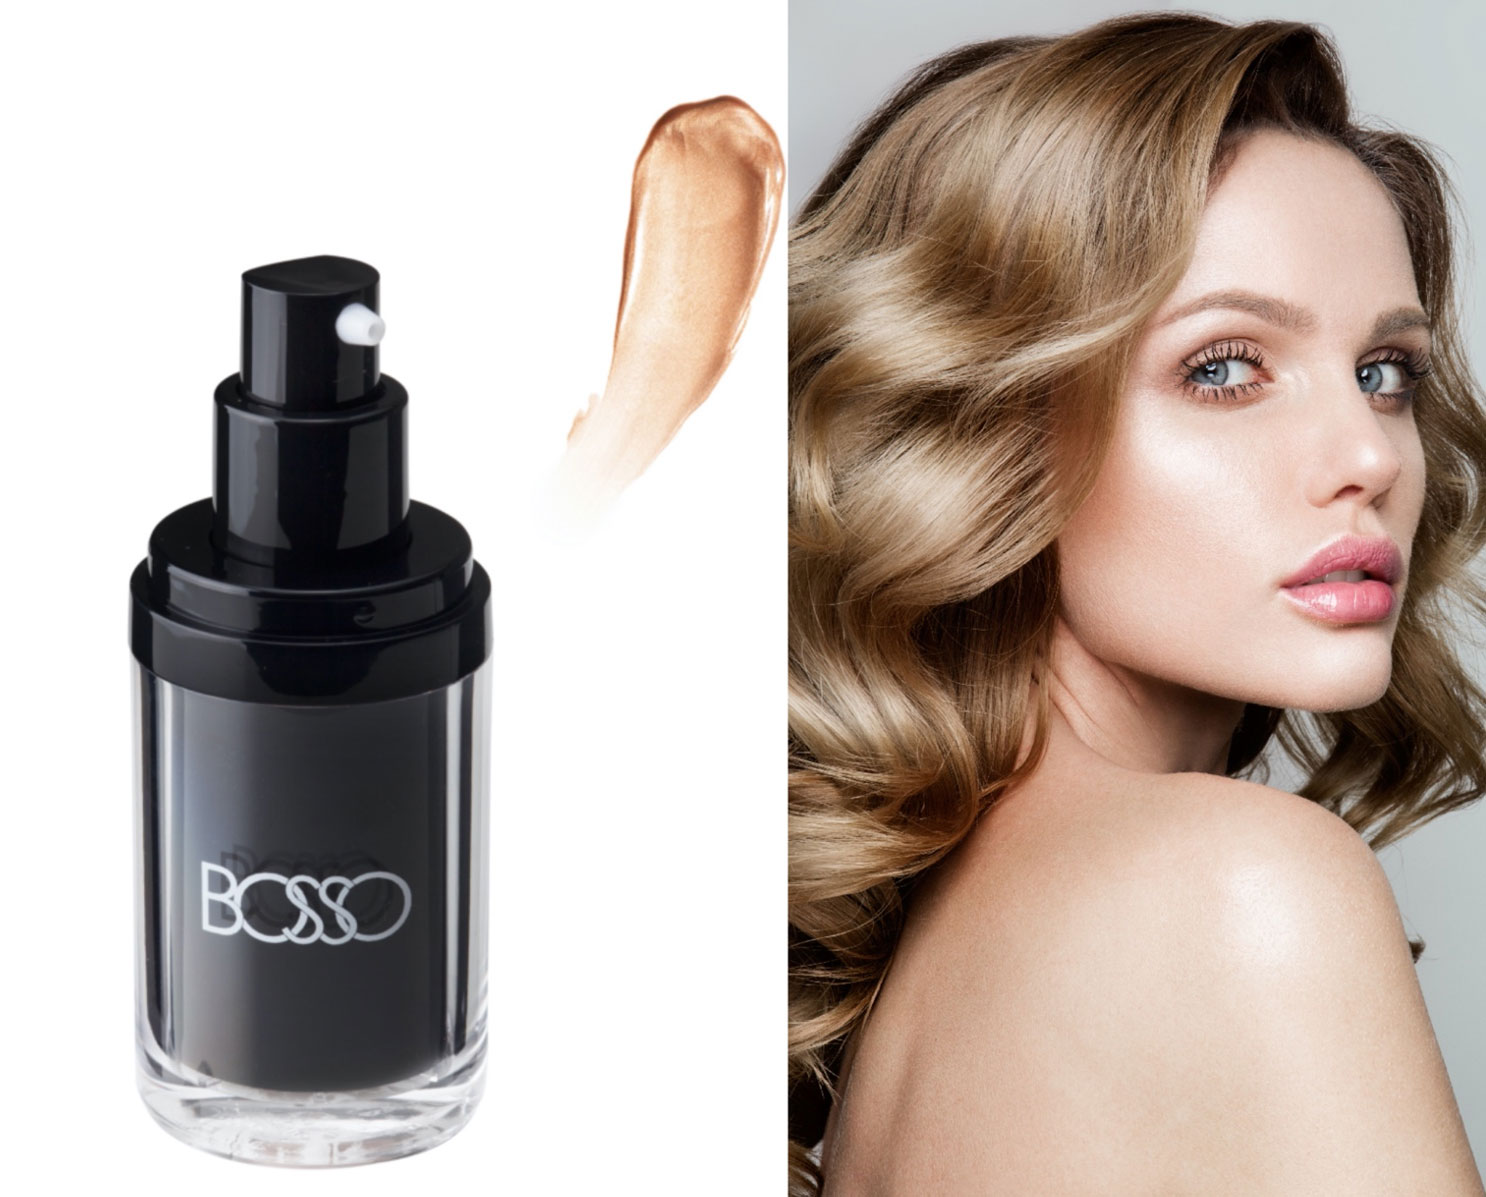 Bosso Makeup Beverly Hills